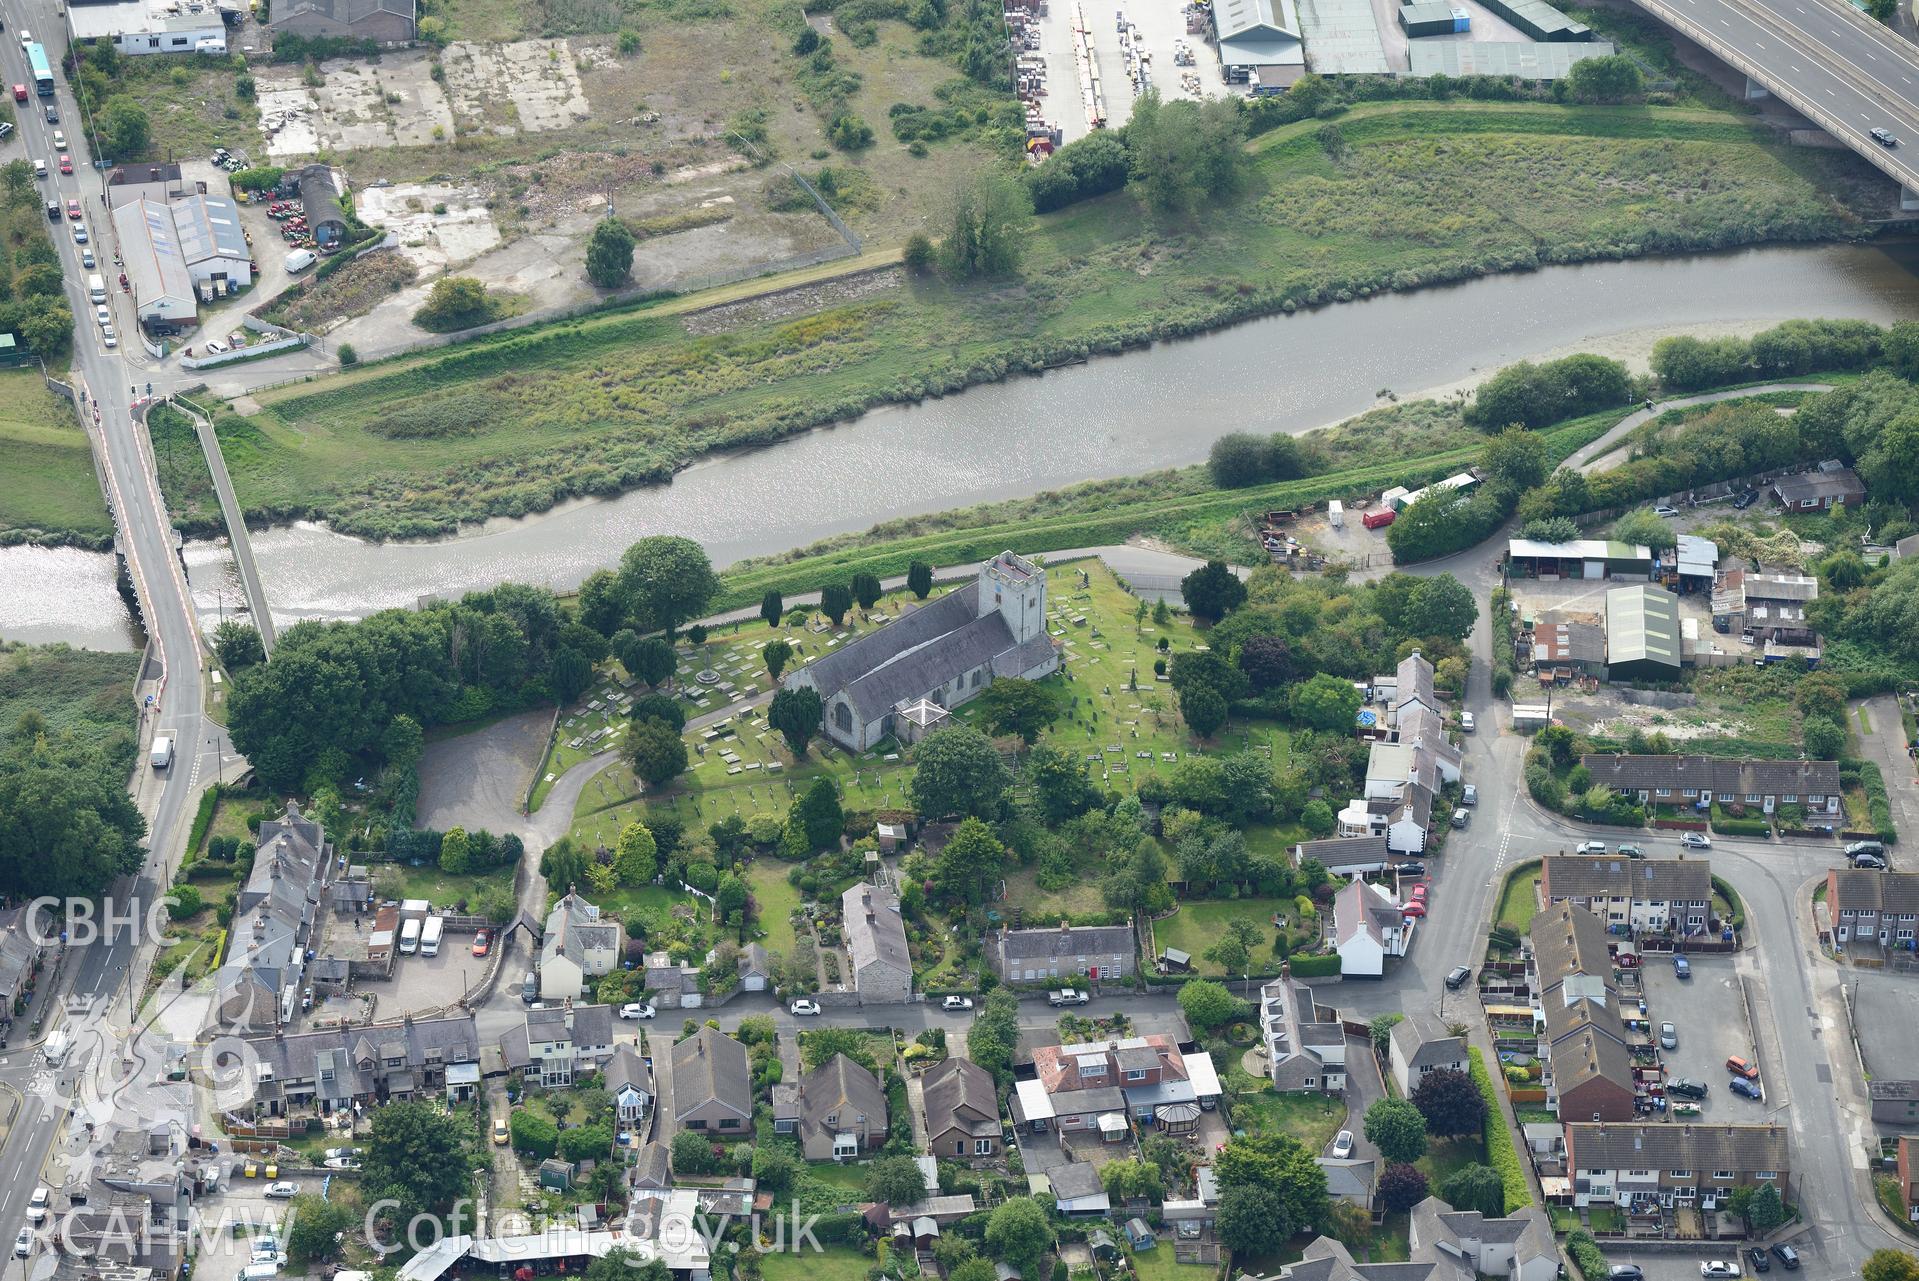 St. Mary's church and Rhuddlan bridge, Rhuddlan. Oblique aerial photograph taken during the Royal Commission's programme of archaeological aerial reconnaissance by Toby Driver on 11th September 2015.